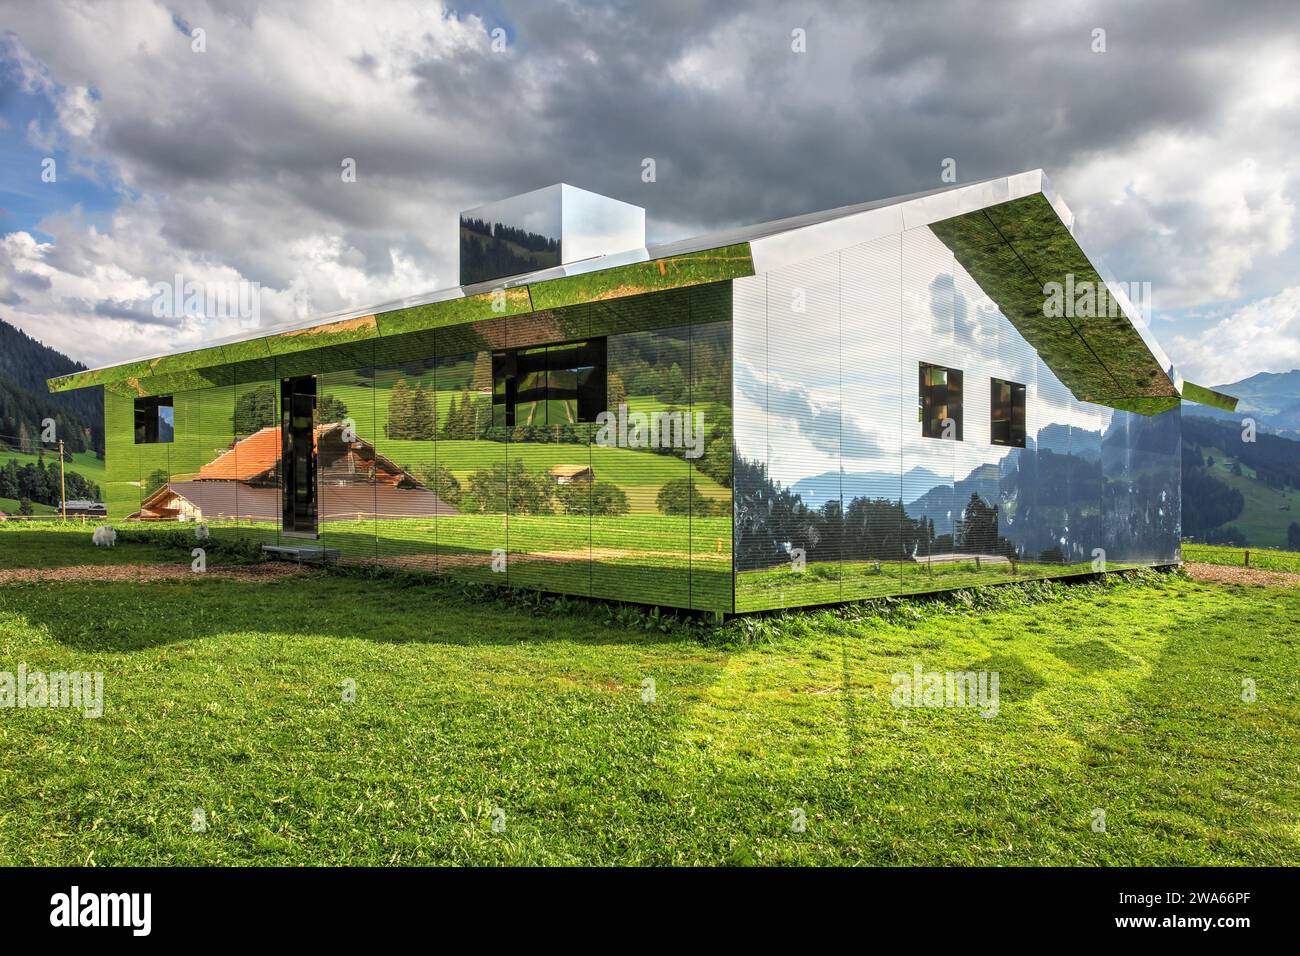 Temporary art instalation (2020) by Doug Aitken, Mirage consist of a house of mirrors on a hiking trail between Schönried and Gstaad, Switzerland repr Stock Photo